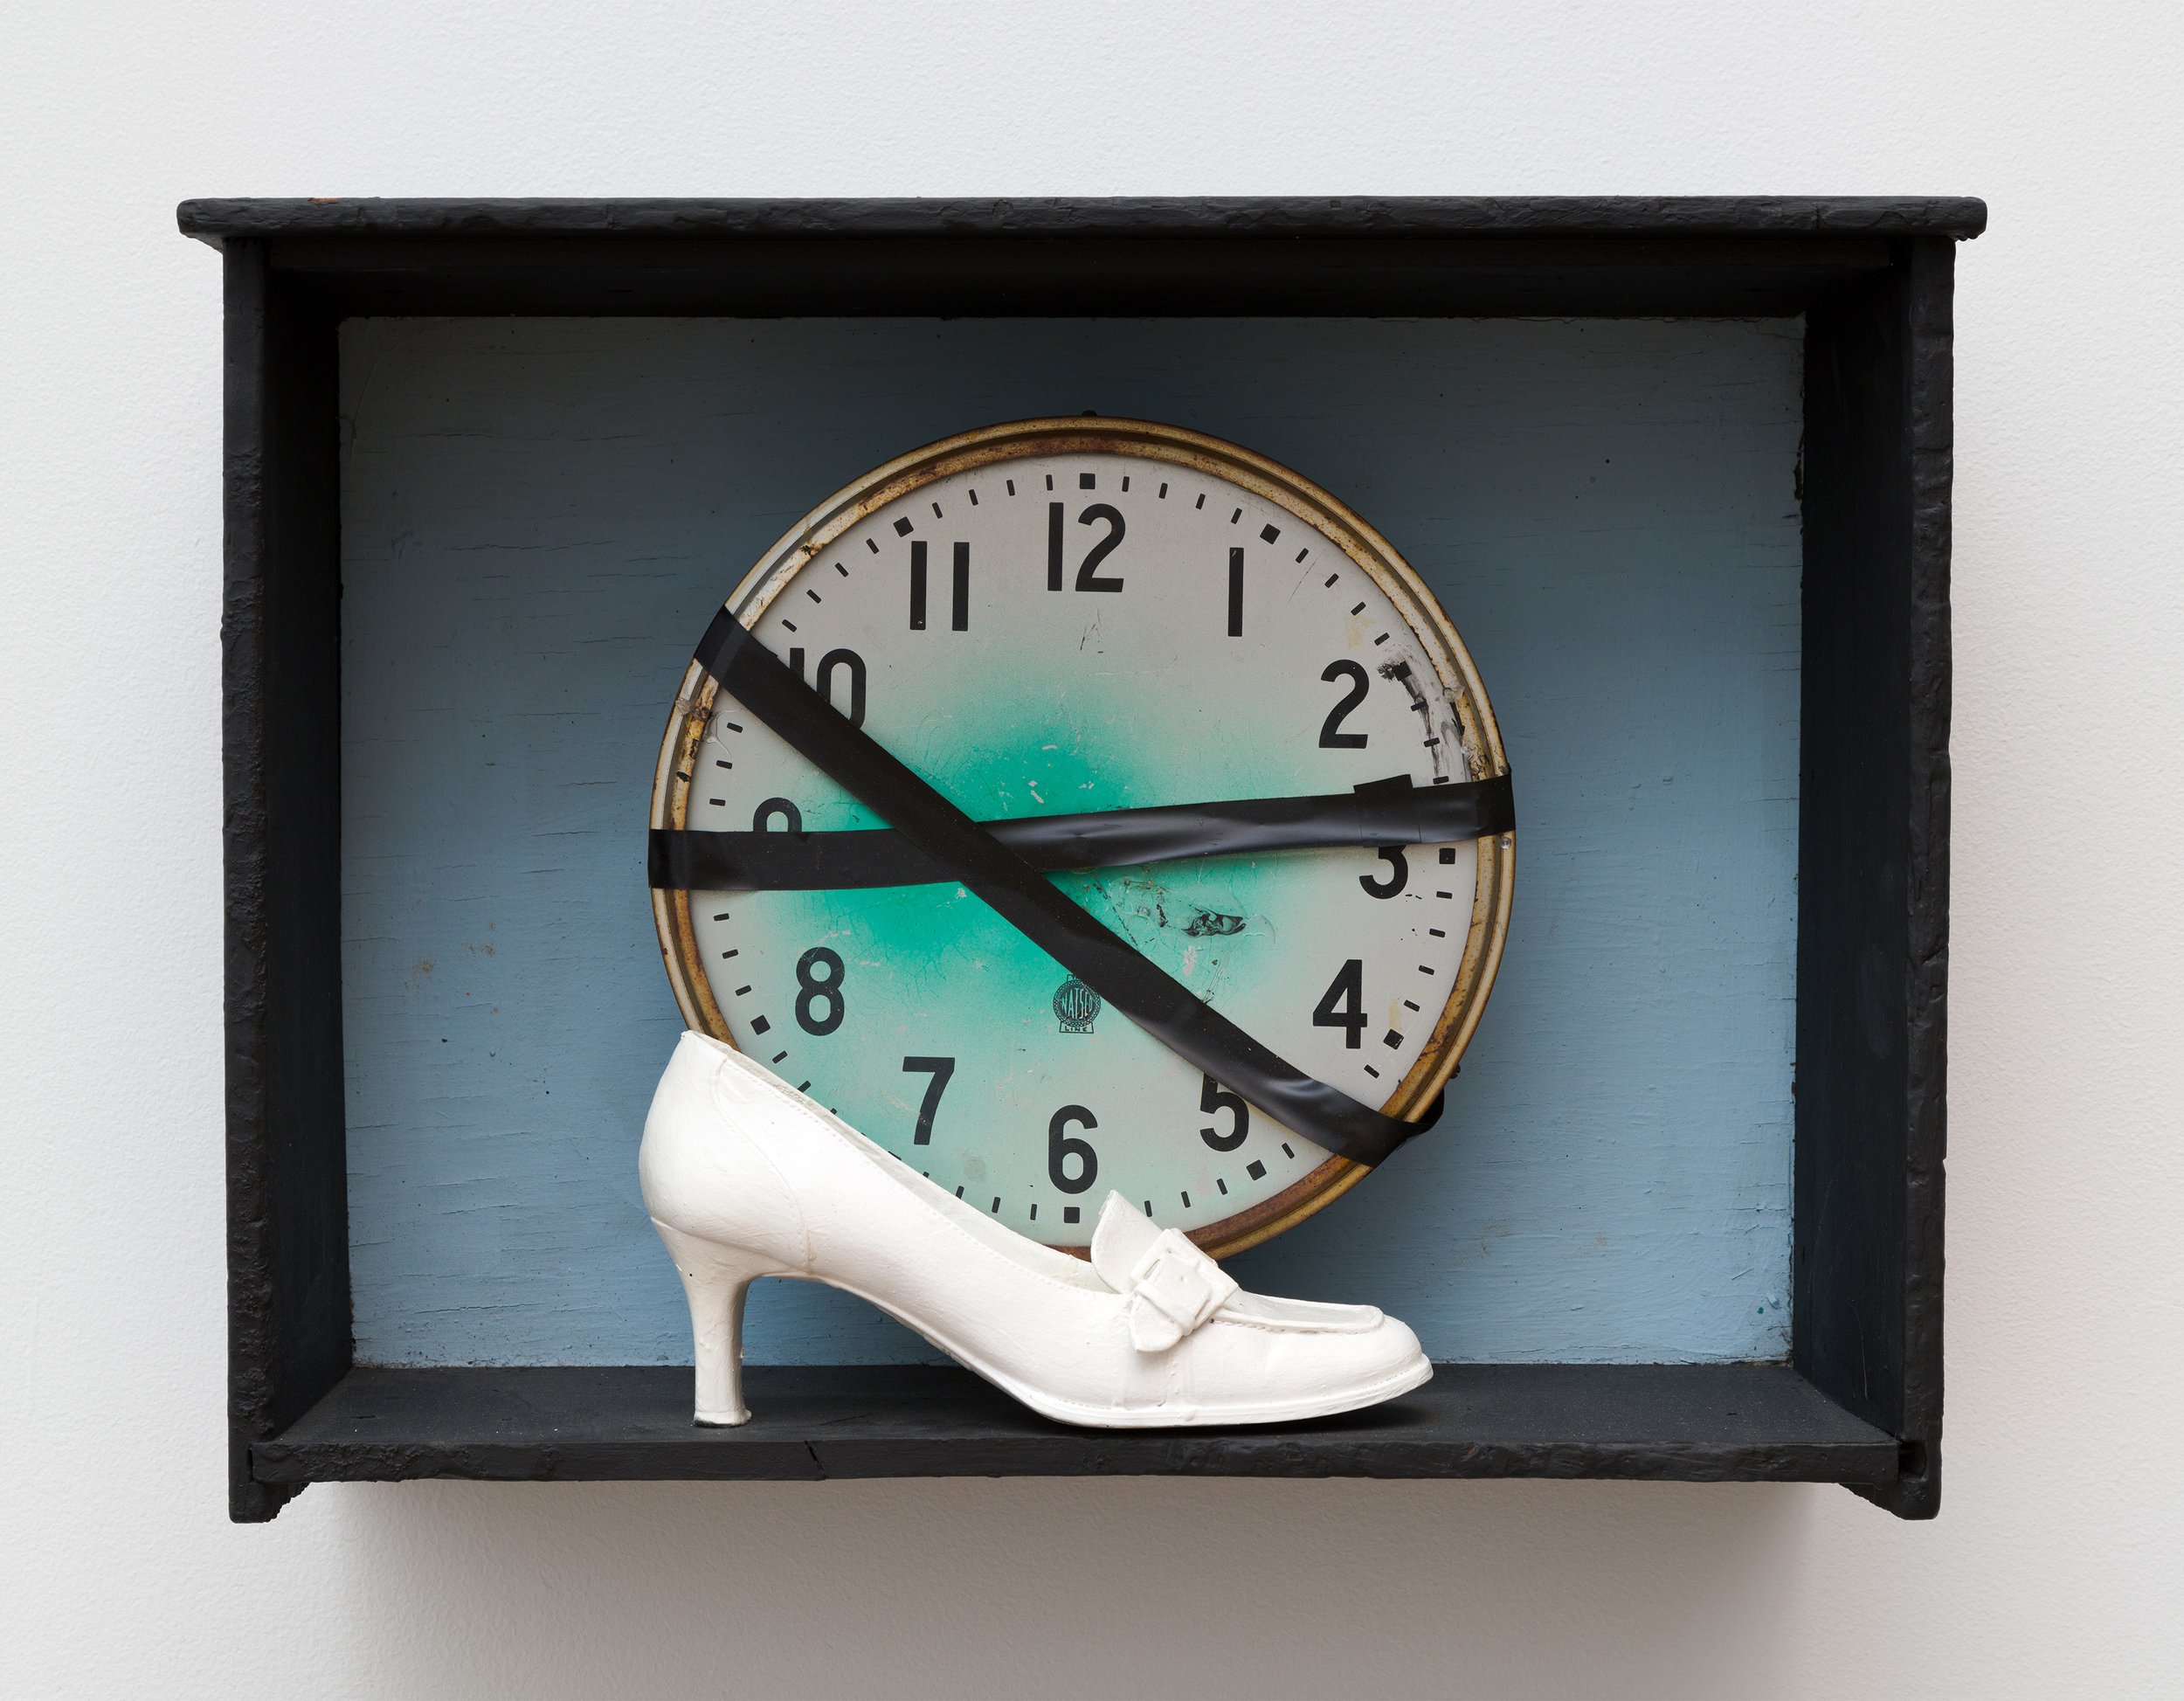  Tyree Guyton,  One step at a time , 2015, wood, leather, metal, electrical tape, 16 1/4 x 22 x 8 1/4 in 